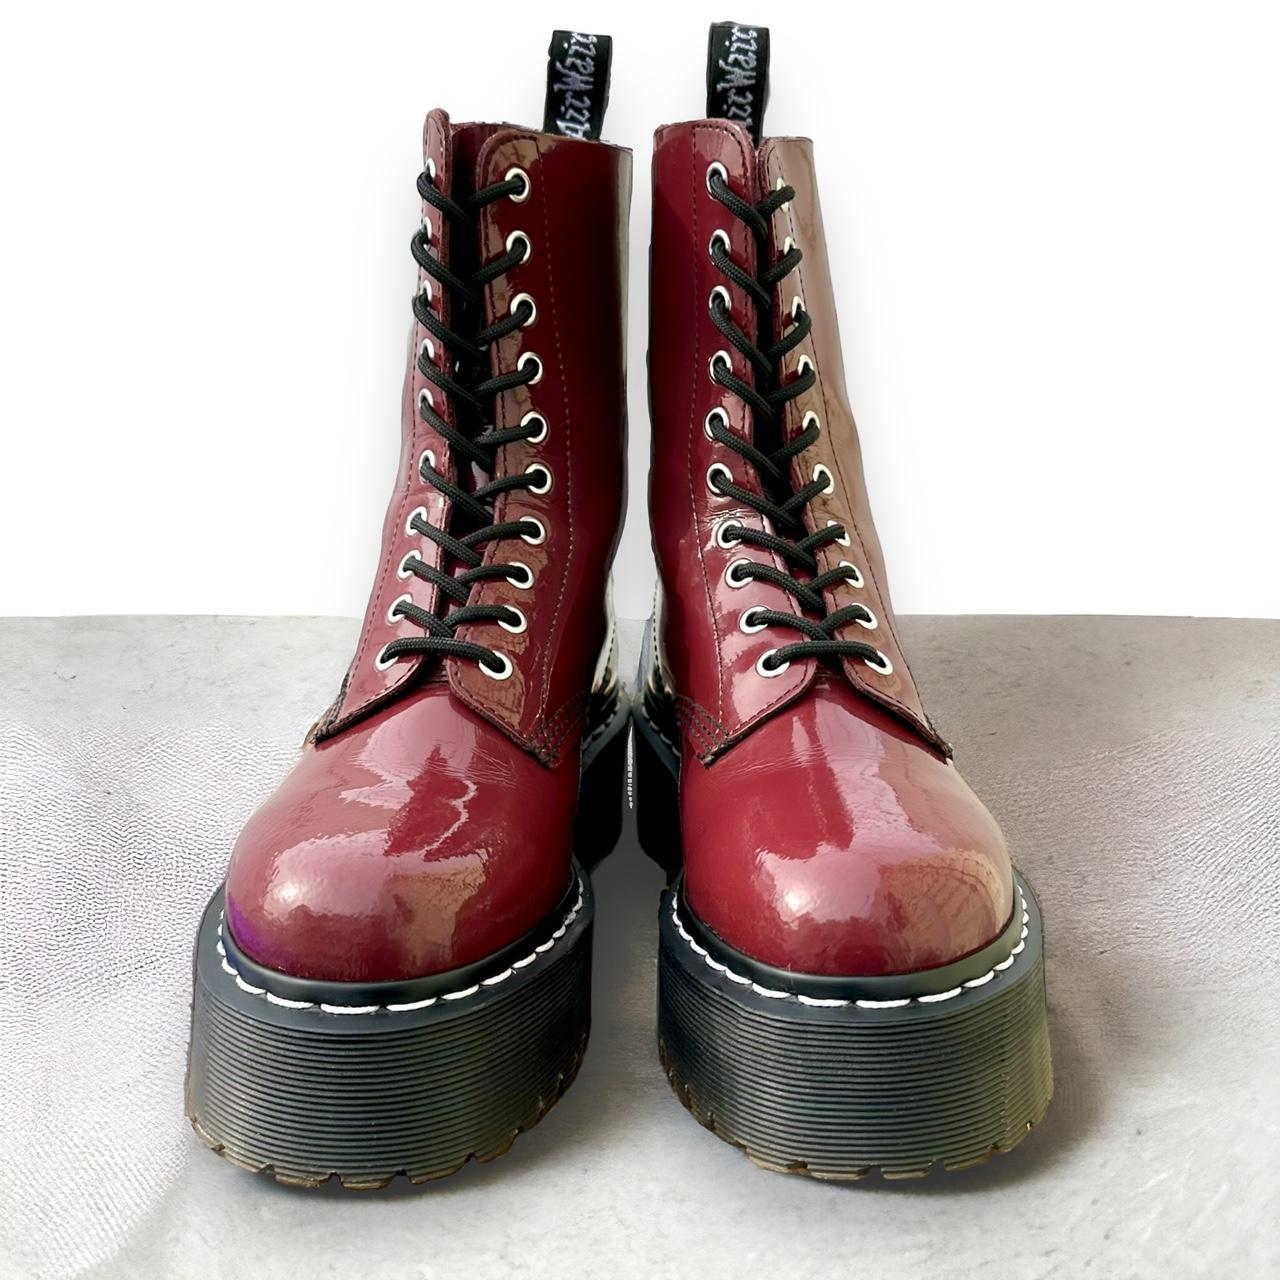 AGGY 1490 UK5/US7 Cherry Red Patent Leather 10-hole...